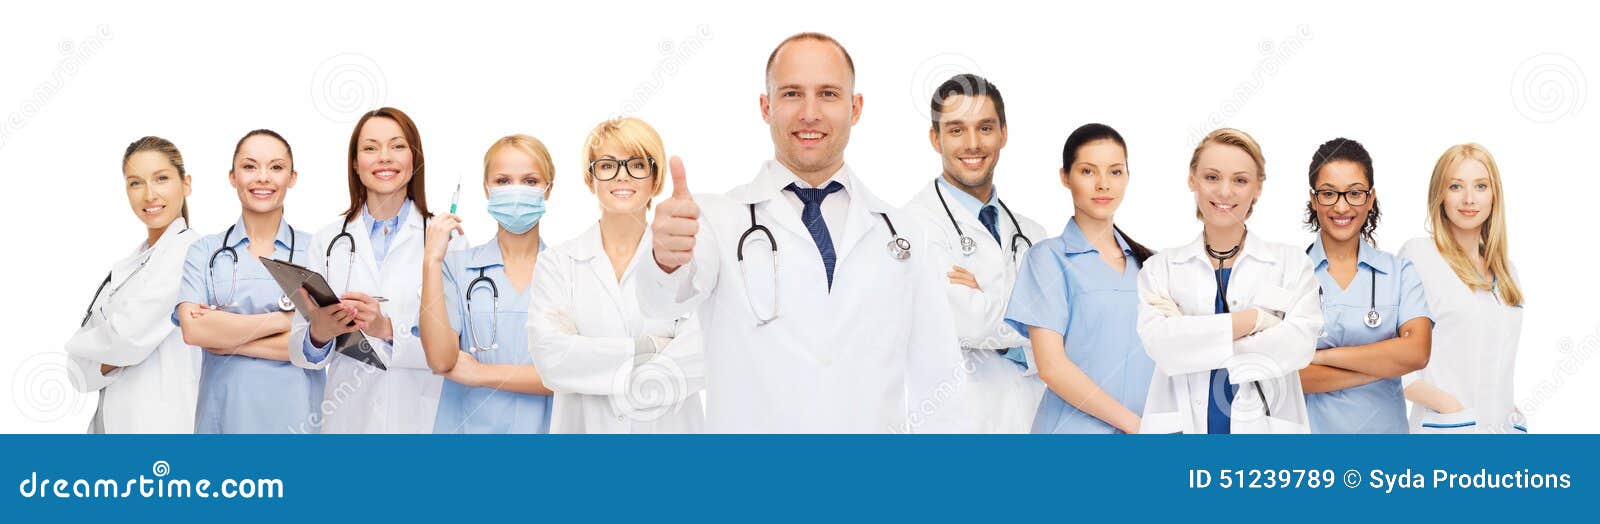 Group of smiling doctors with showing thumbs up. Medicine, profession, teamwork and healthcare concept - international group of smiling medics or doctors with clipboard and stethoscopes with showing thumbs up over white background